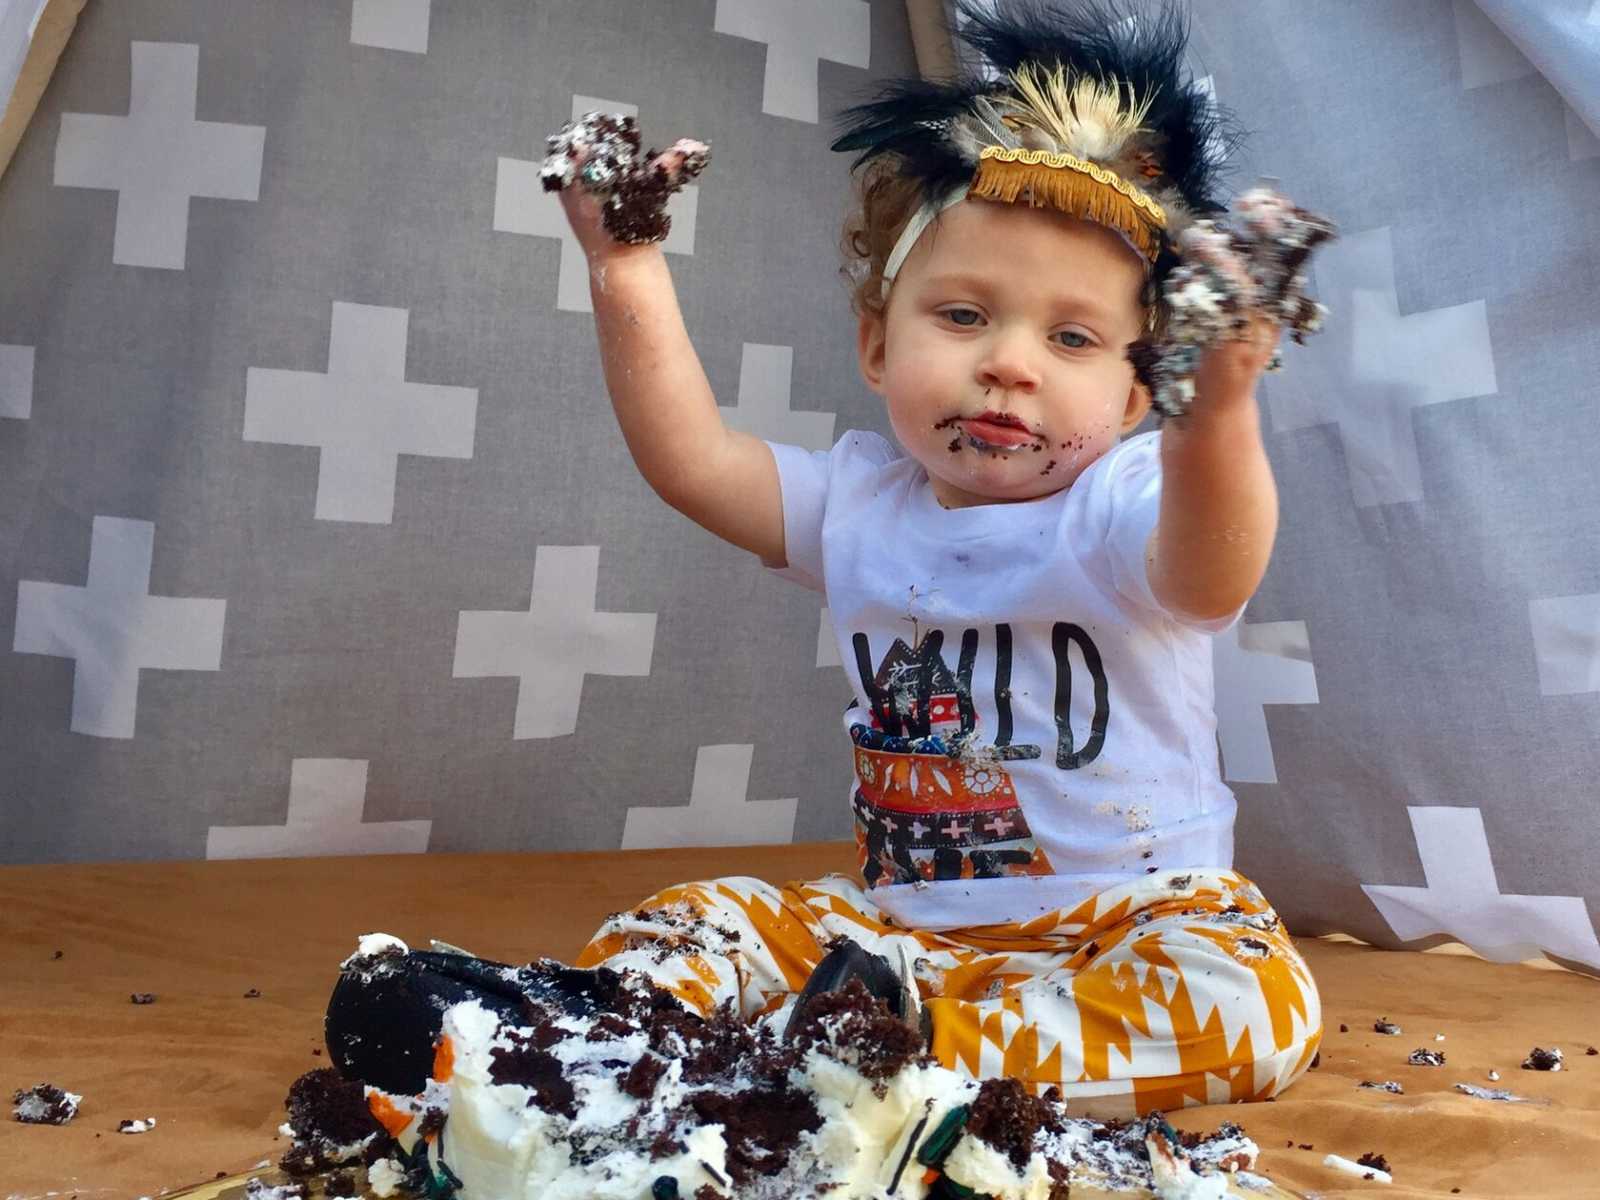 adopted toddler sitting with a destroyed cake in front of him that all over his hands and face